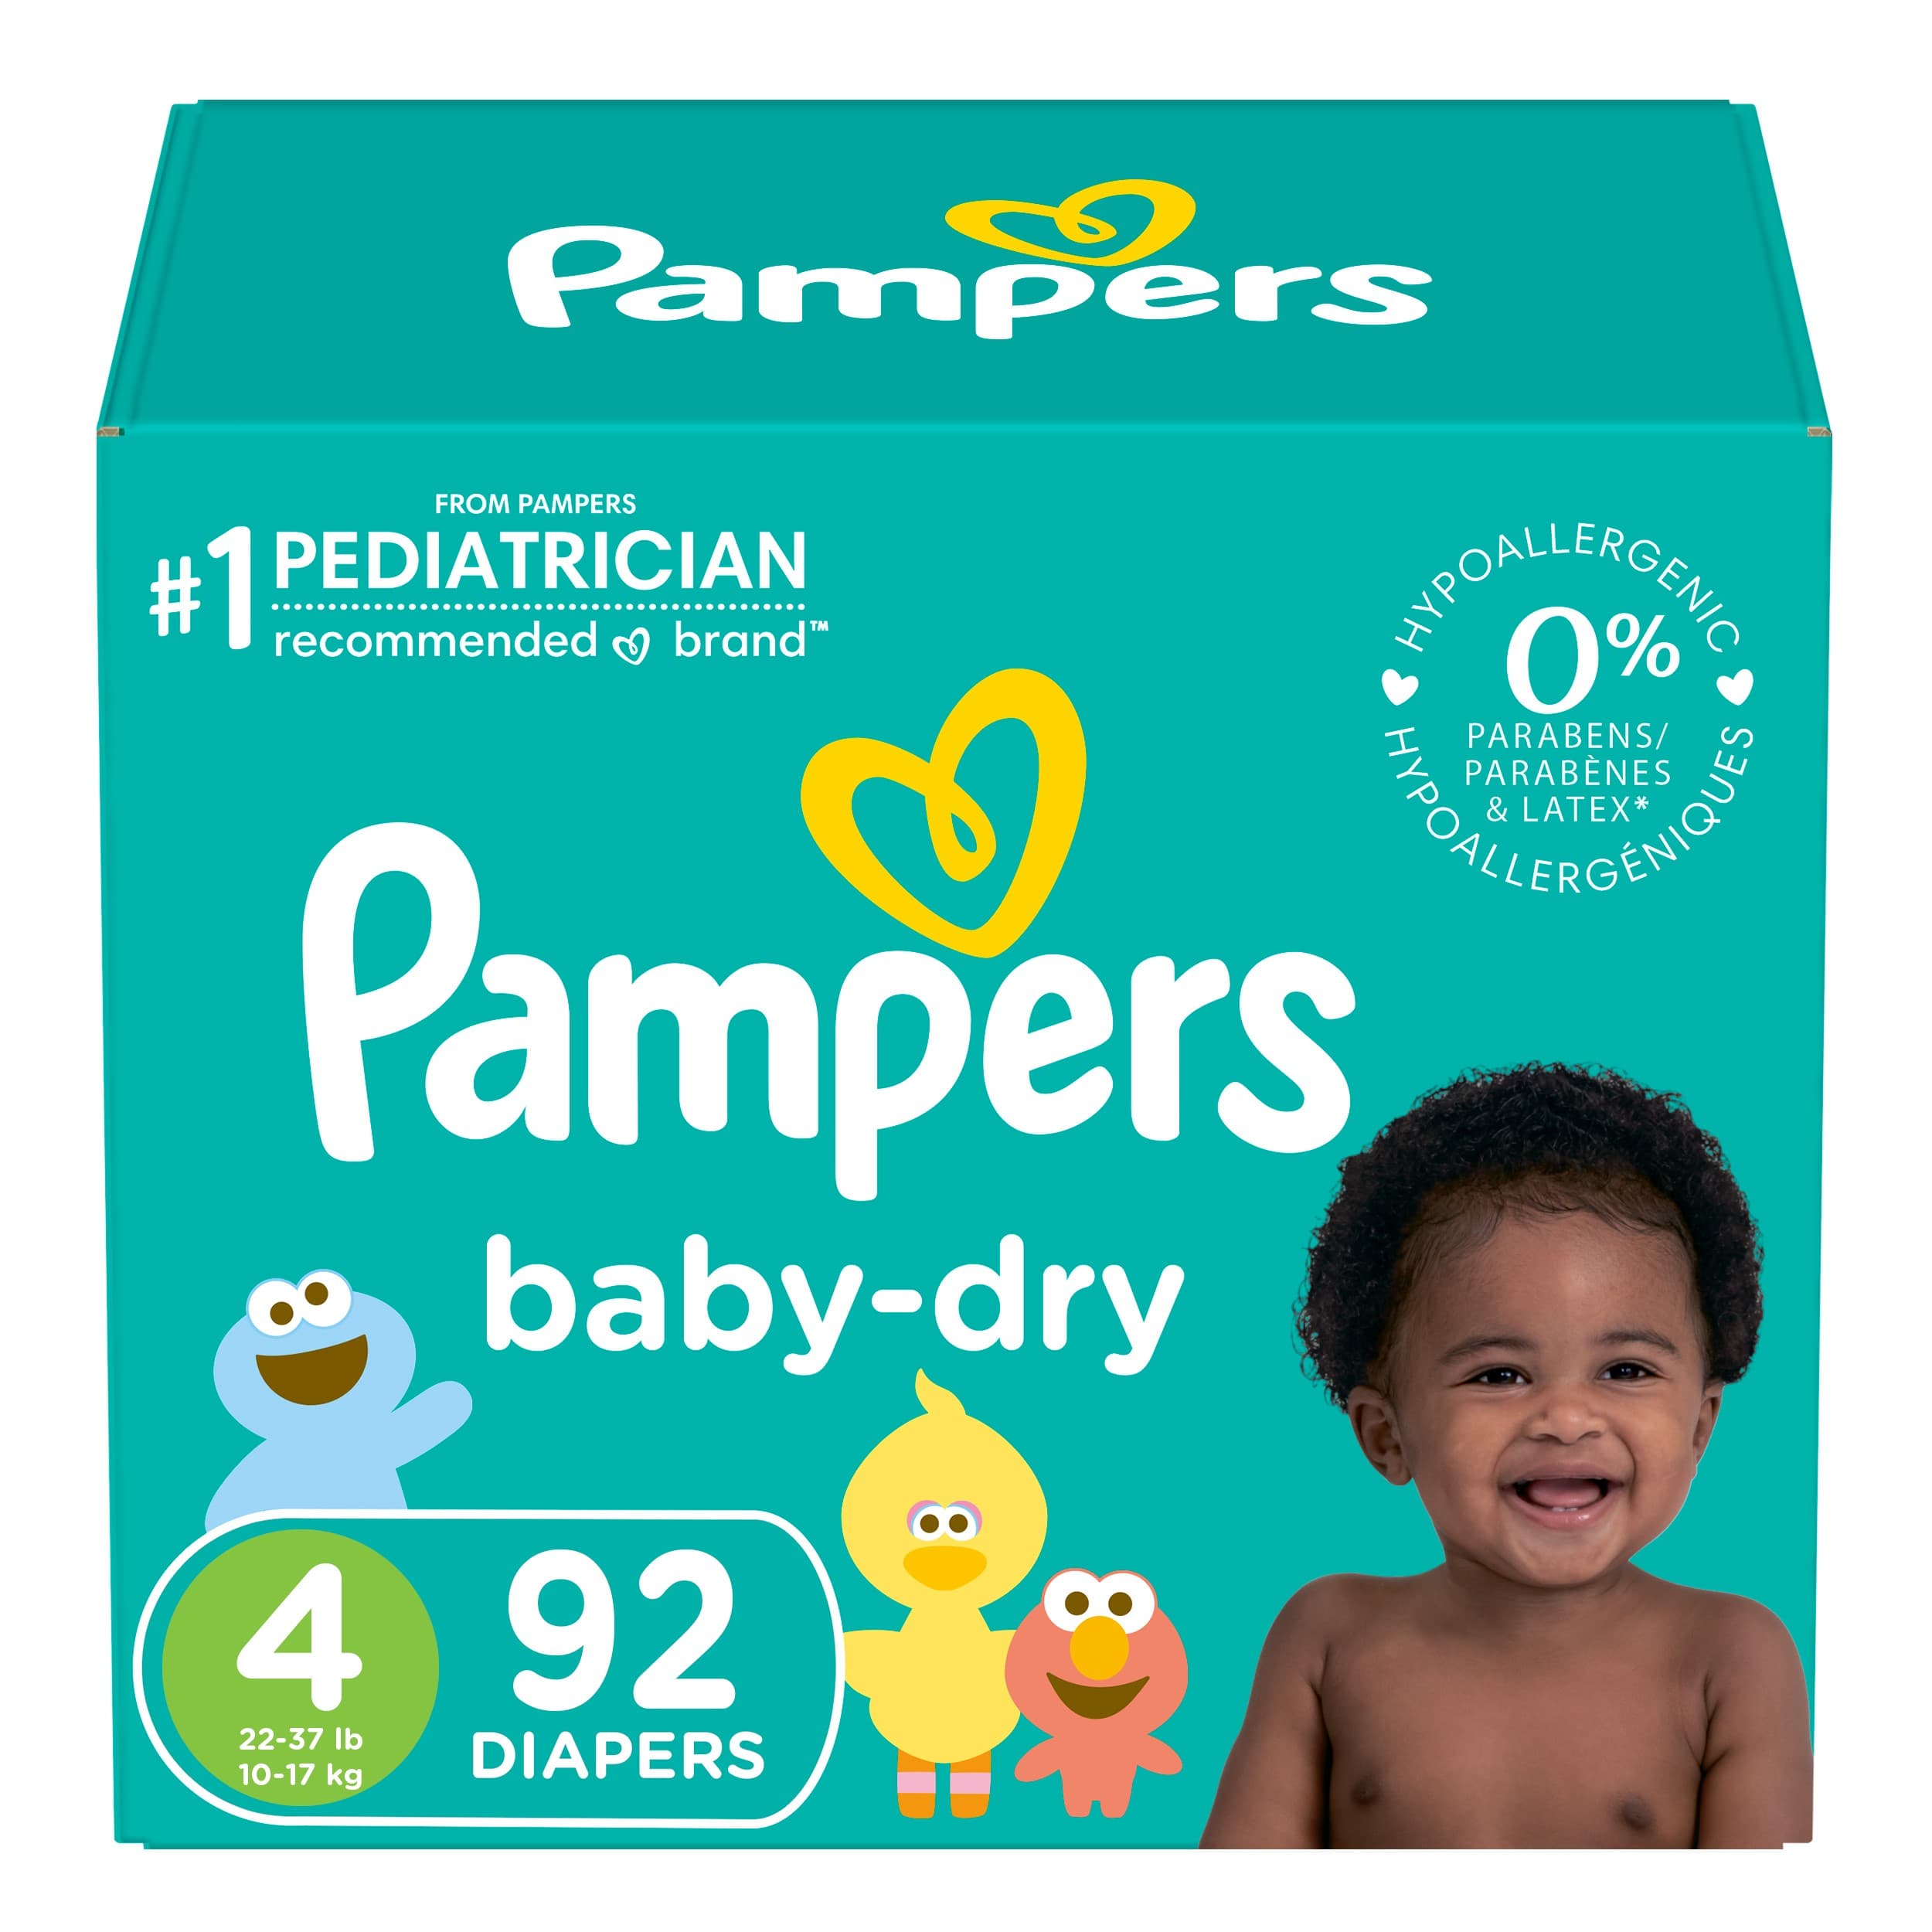 Image of the Pampers Baby Dry box